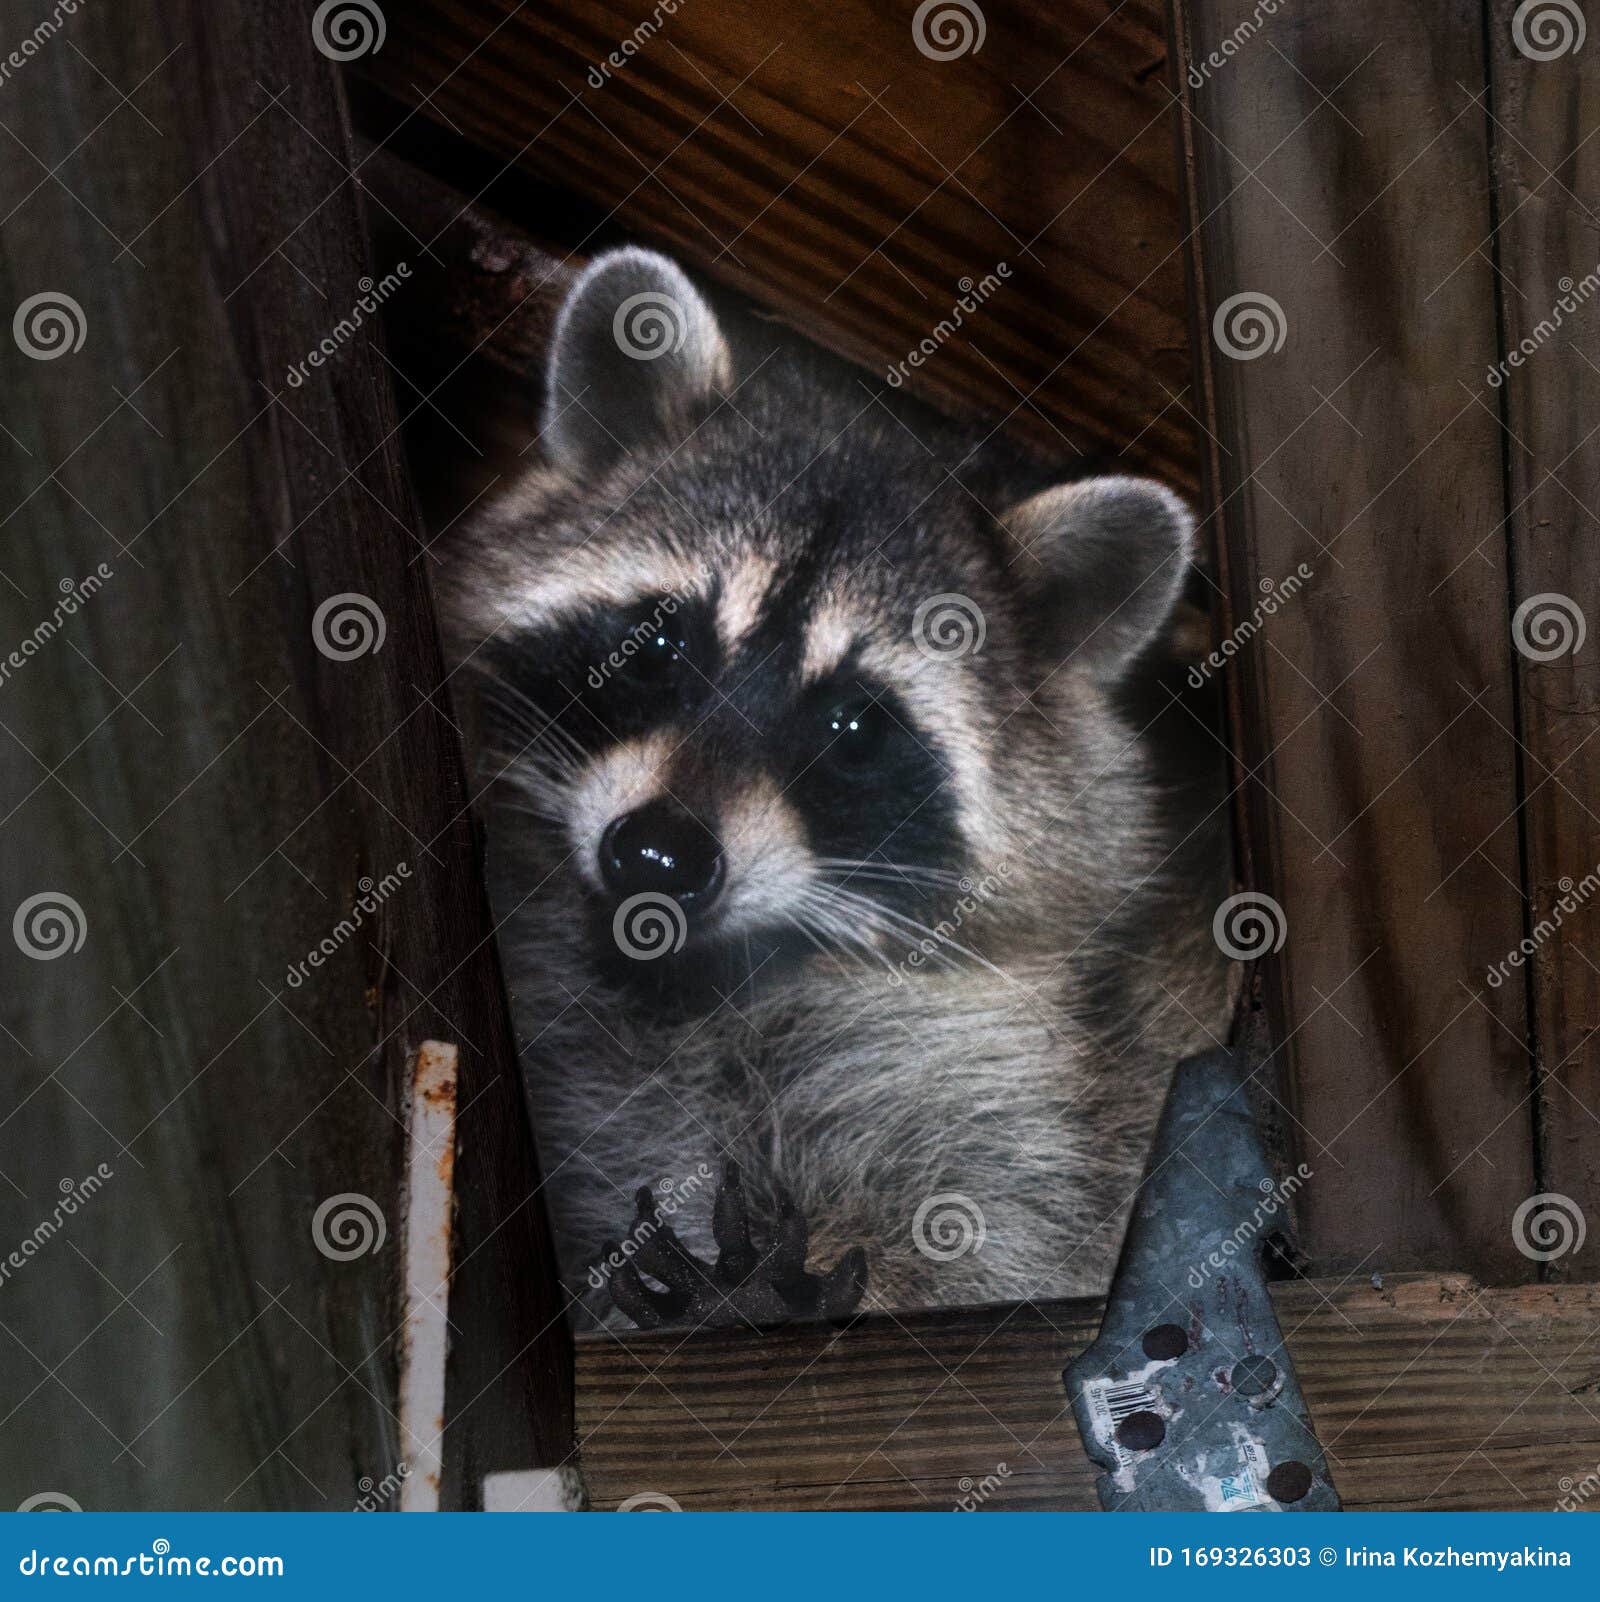 How To Get Rid Of Raccoons In An Attic (In 5 Steps)